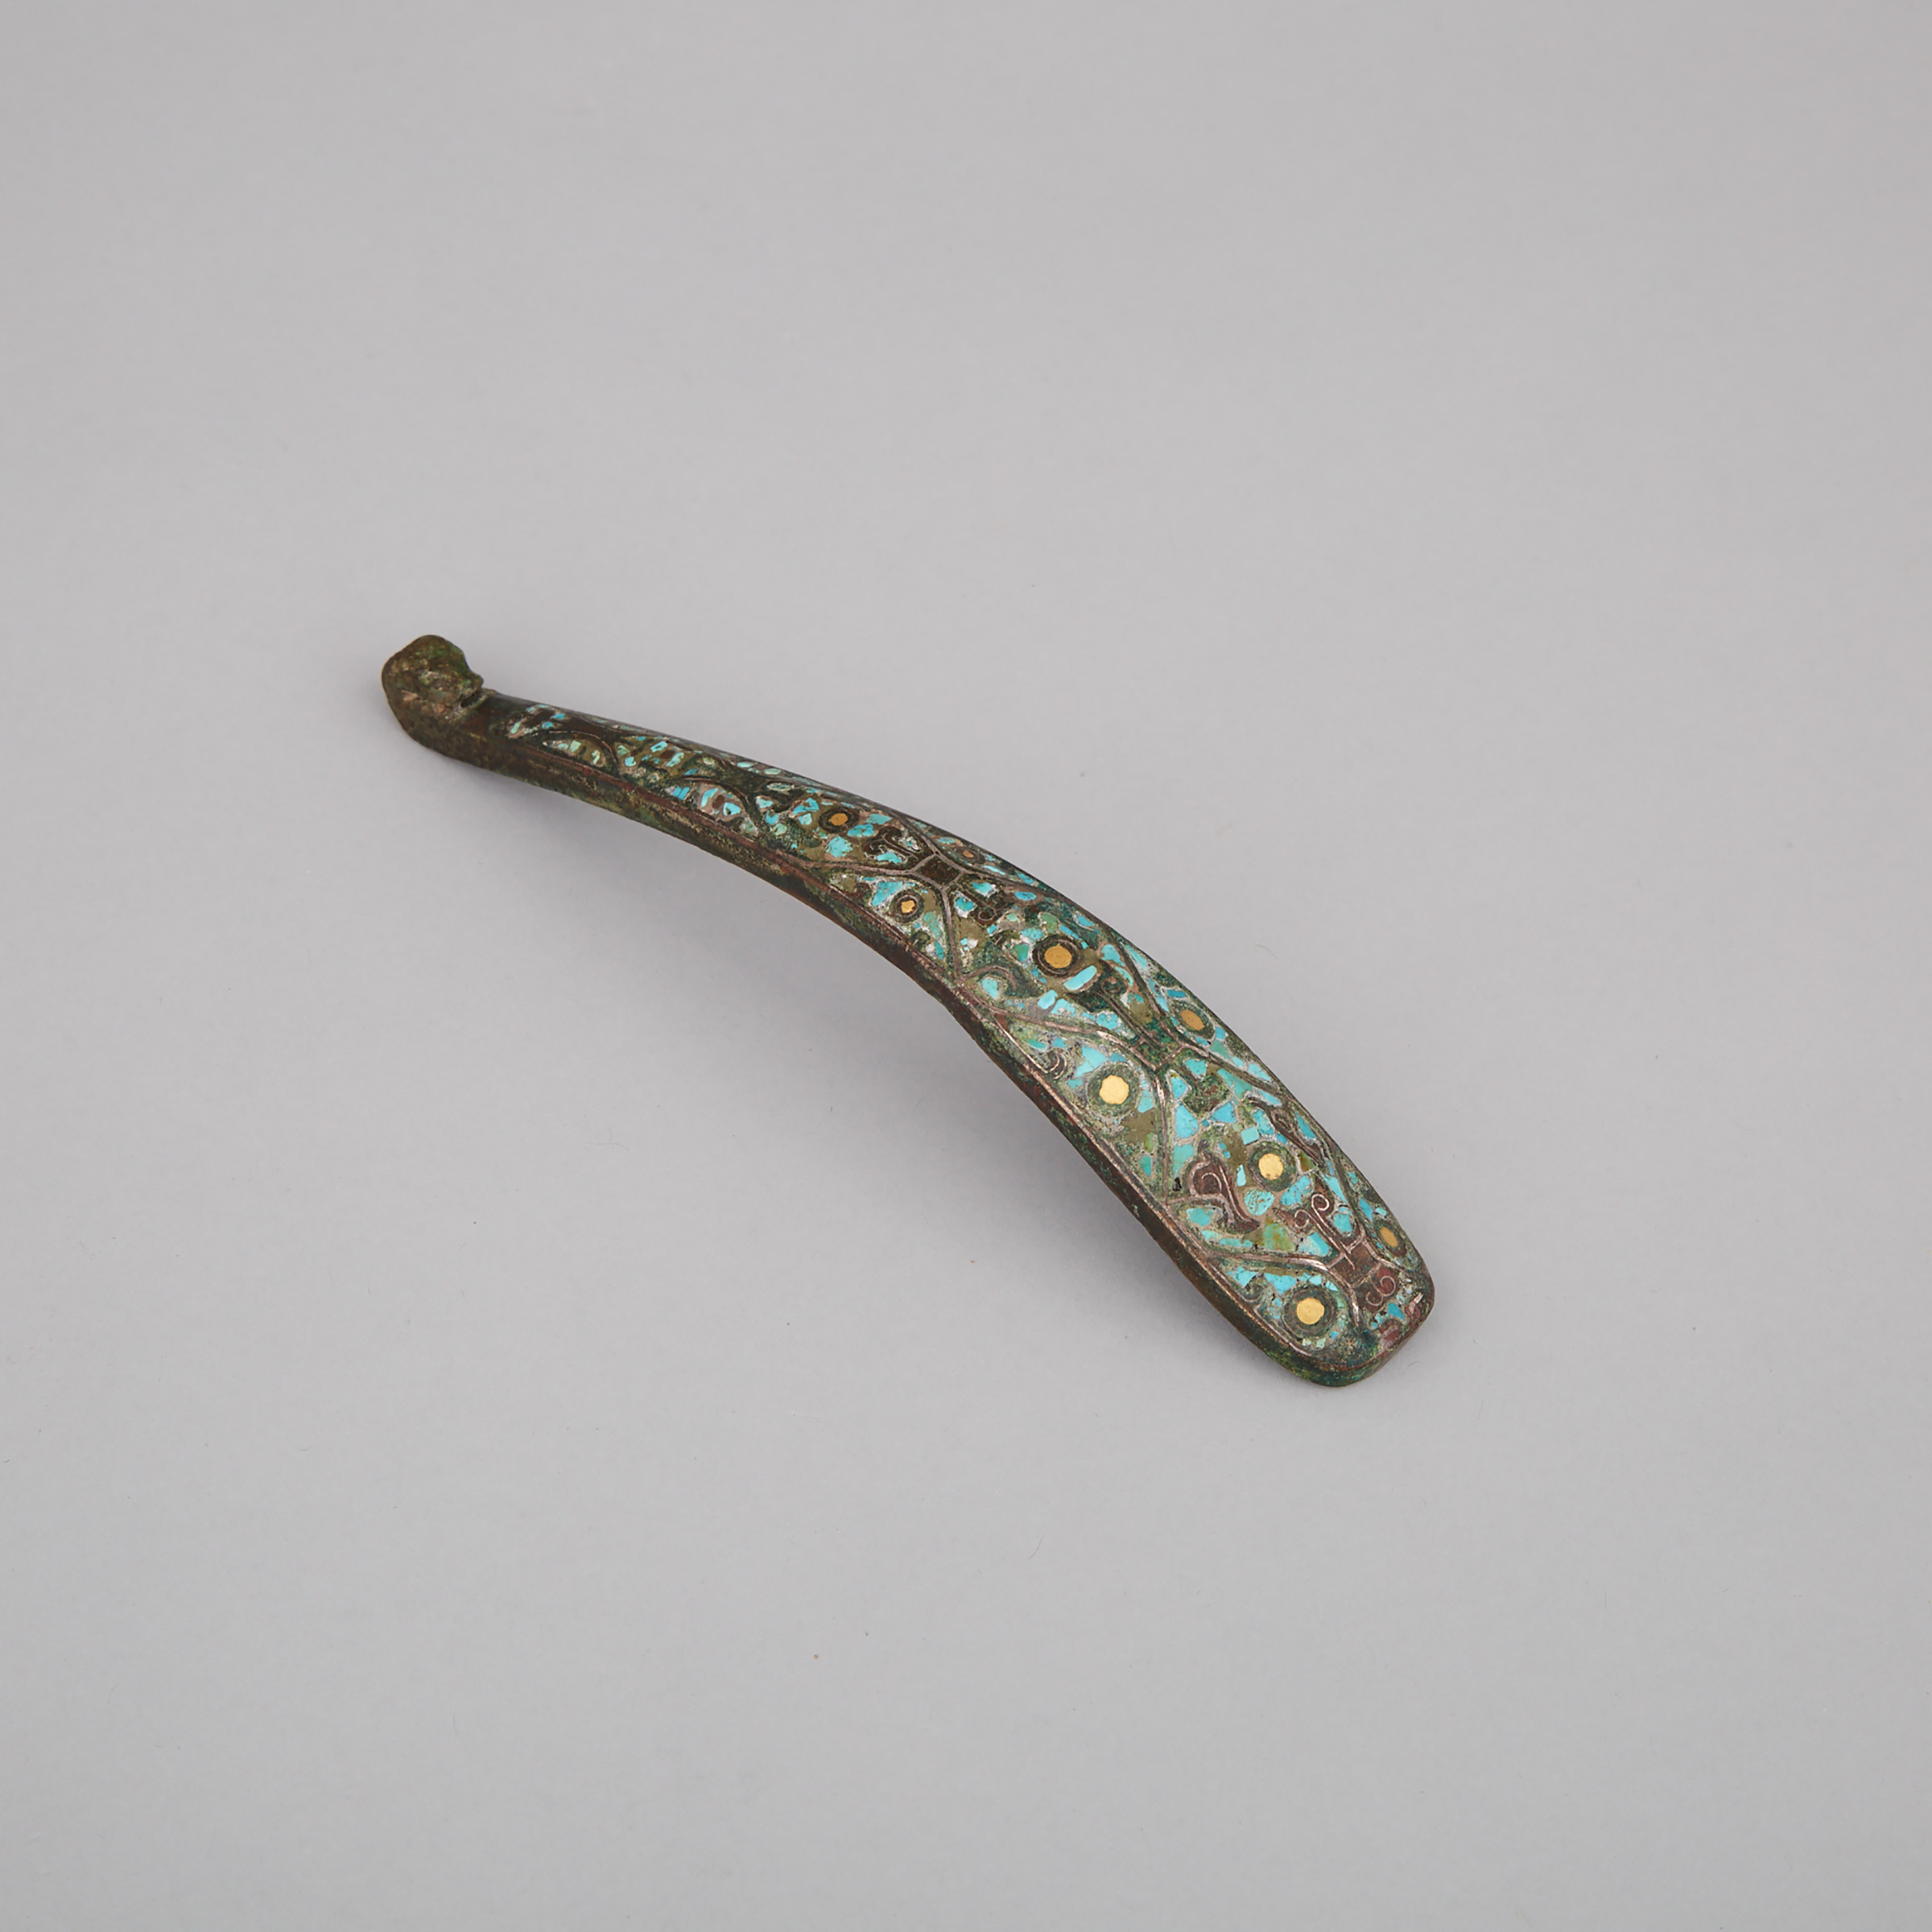 A Gold, Silver and Turquoise Inlaid Bronze Belthook, Warring States Period, 5th to 3rd Century BC